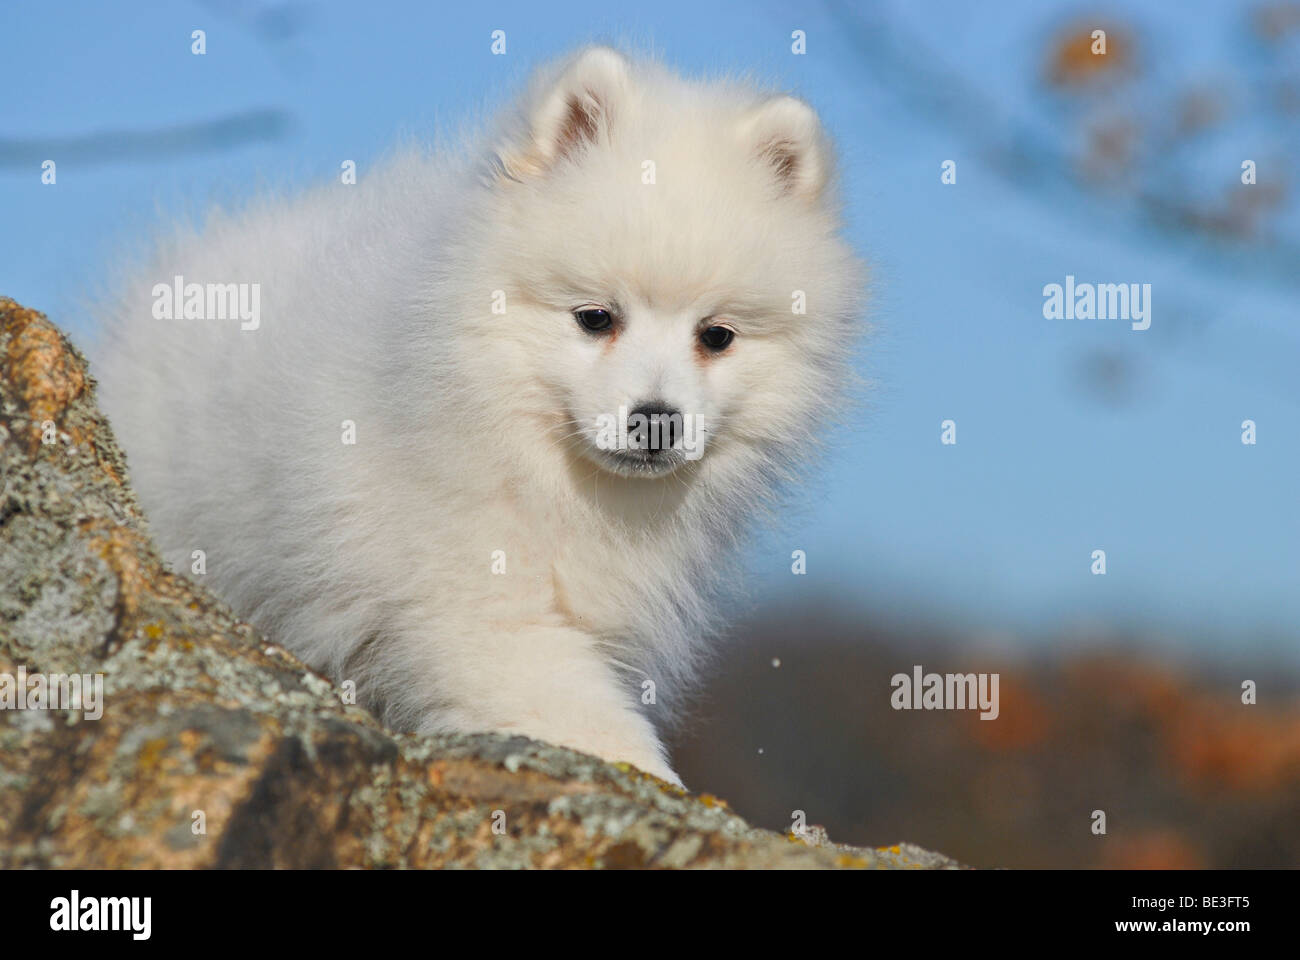 Japanese Spitz or Nihon Supittsu standing on a rock, portrait Stock Photo